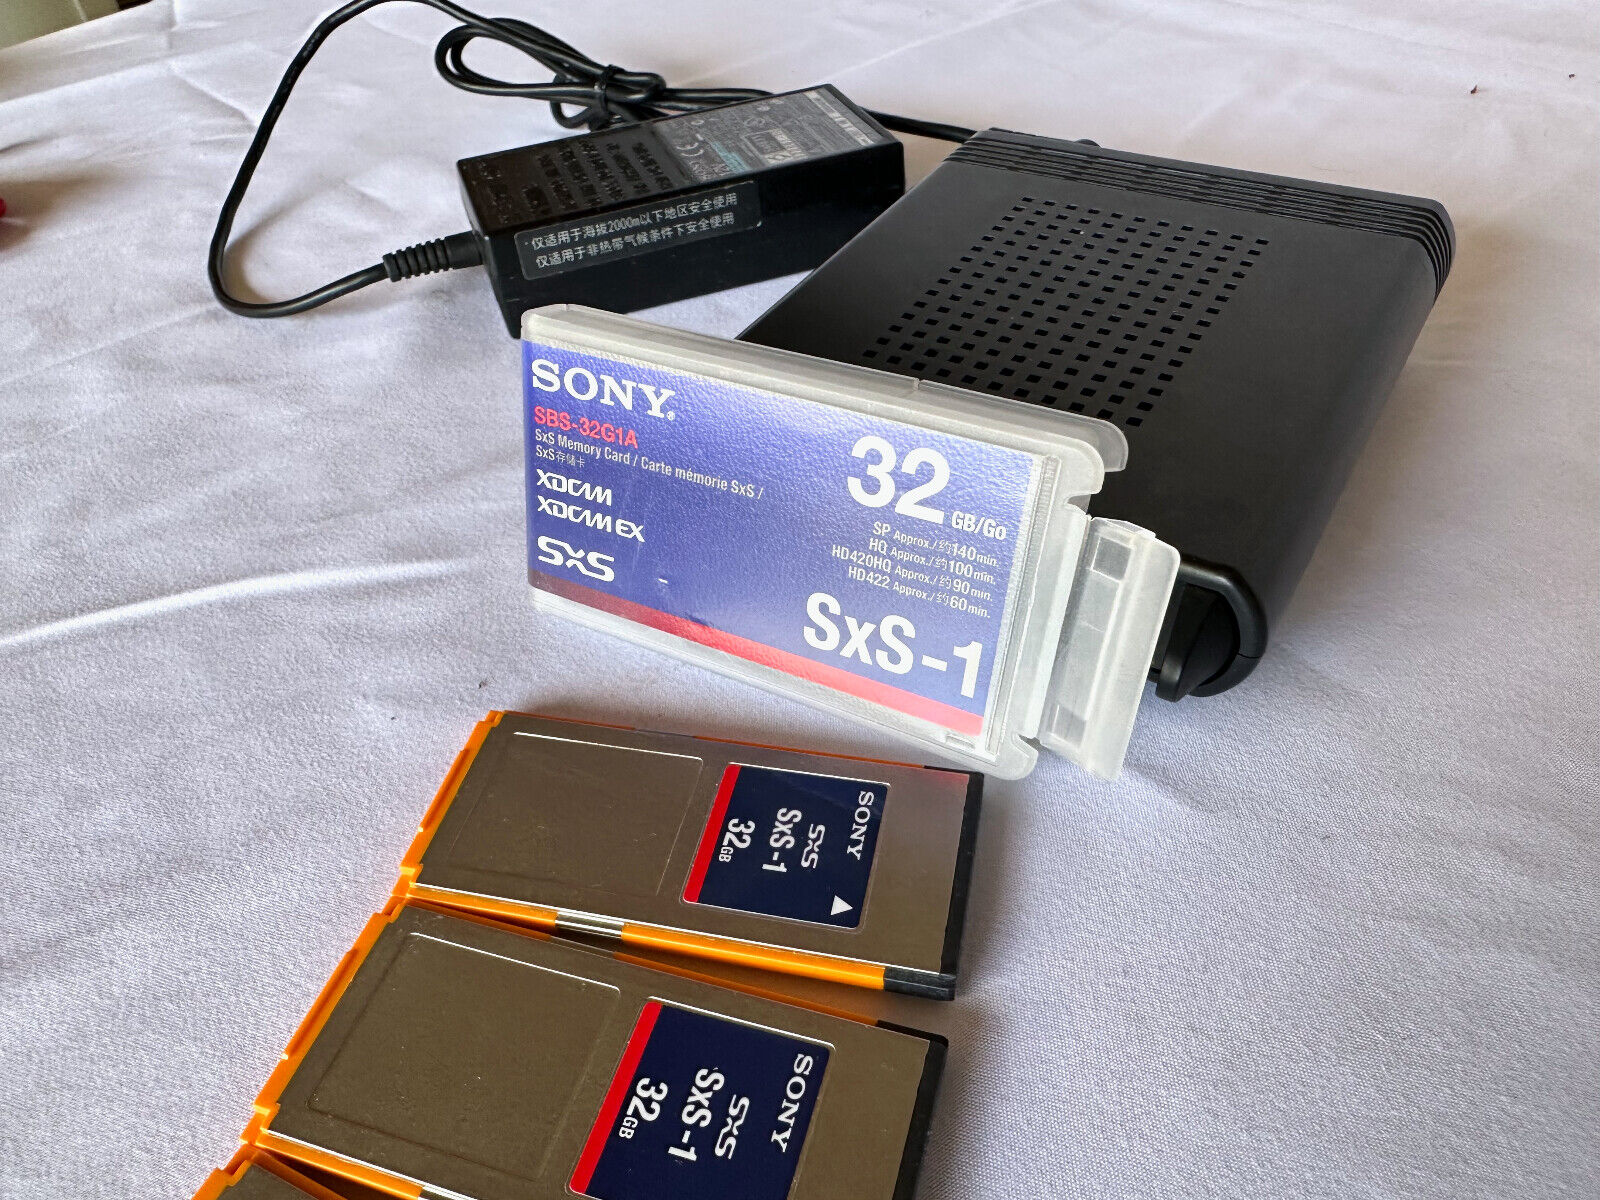 Sony SBAC-US10 SxS Memory Card USB Reader Writer with THREE 32 GB SXS cards